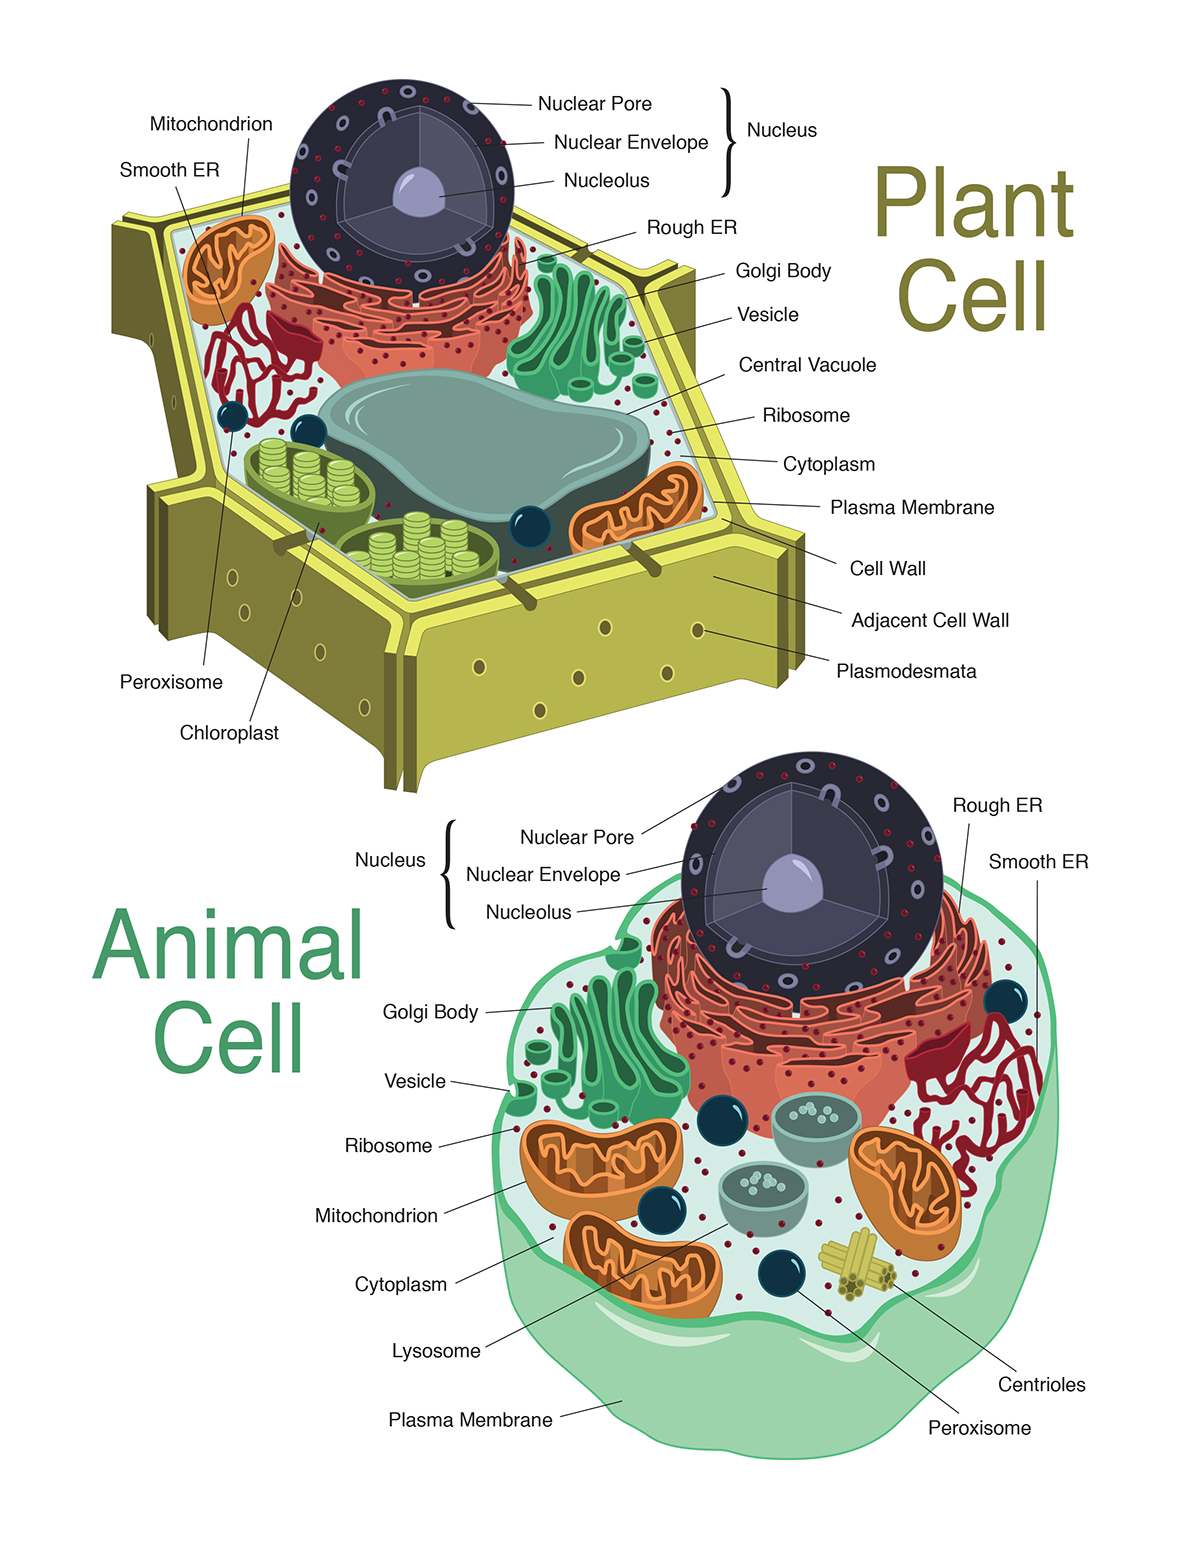 Plant and Animal Cells on Behance